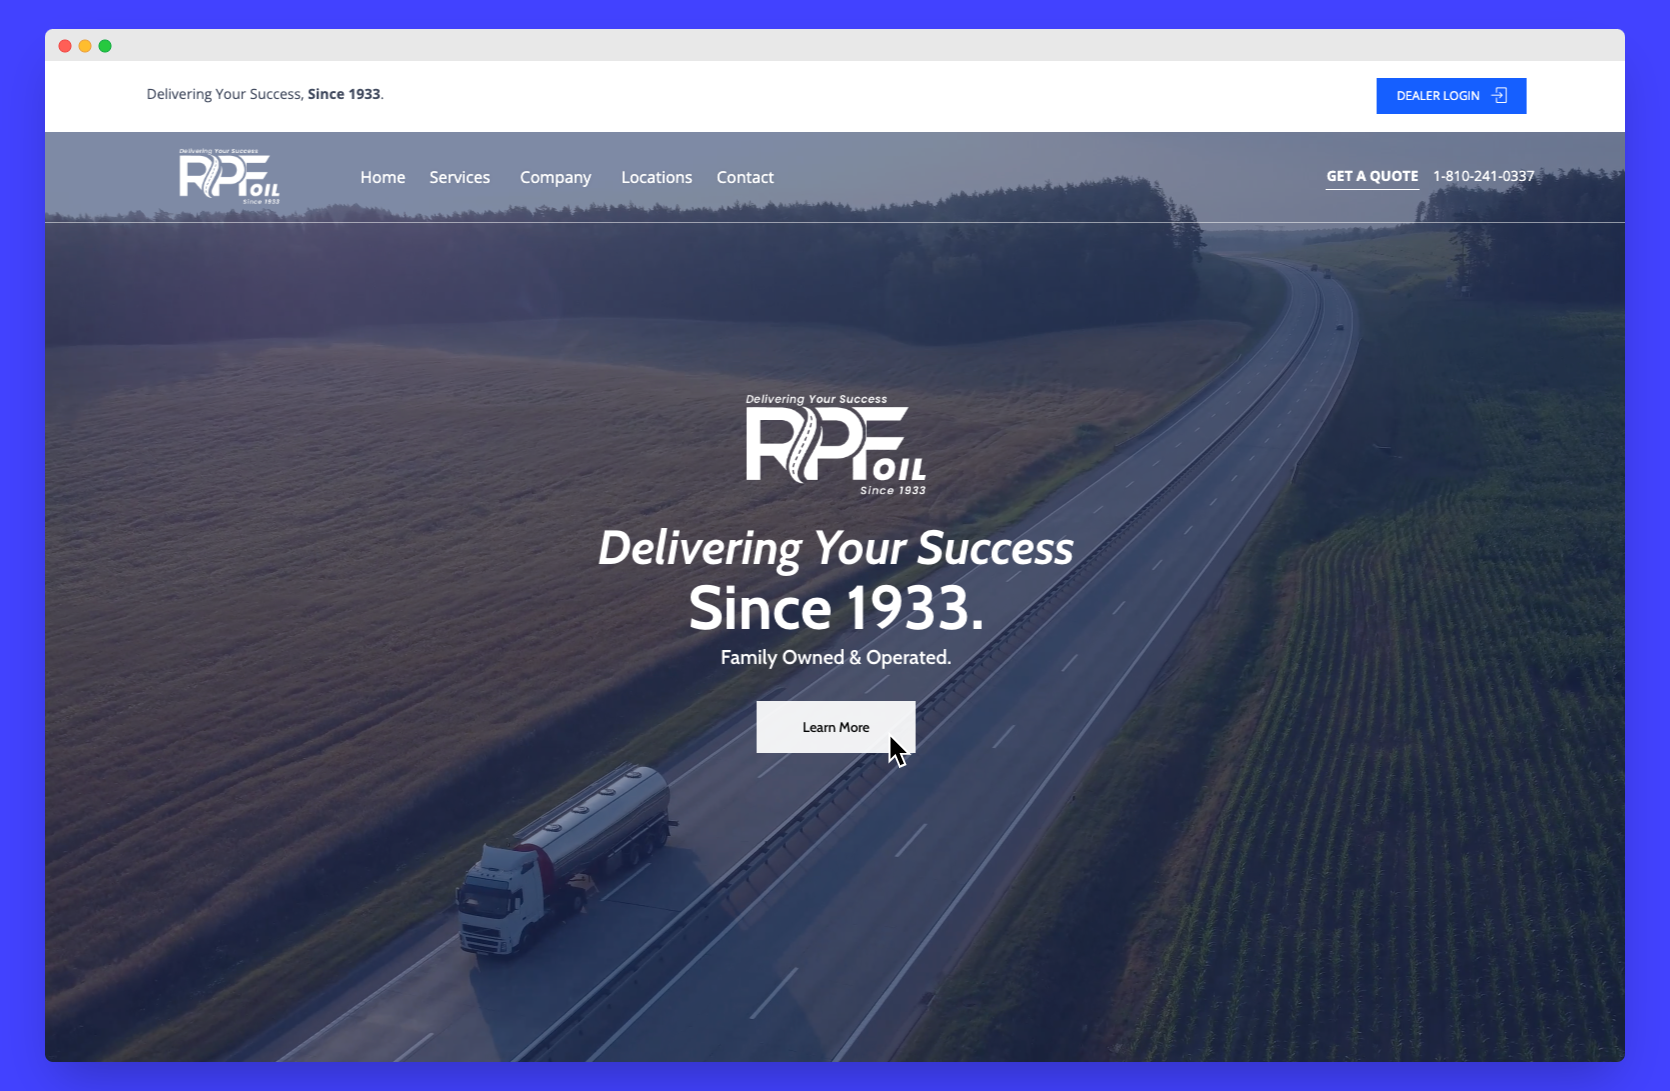 rpf oil company launches brand new website along with brand refresh